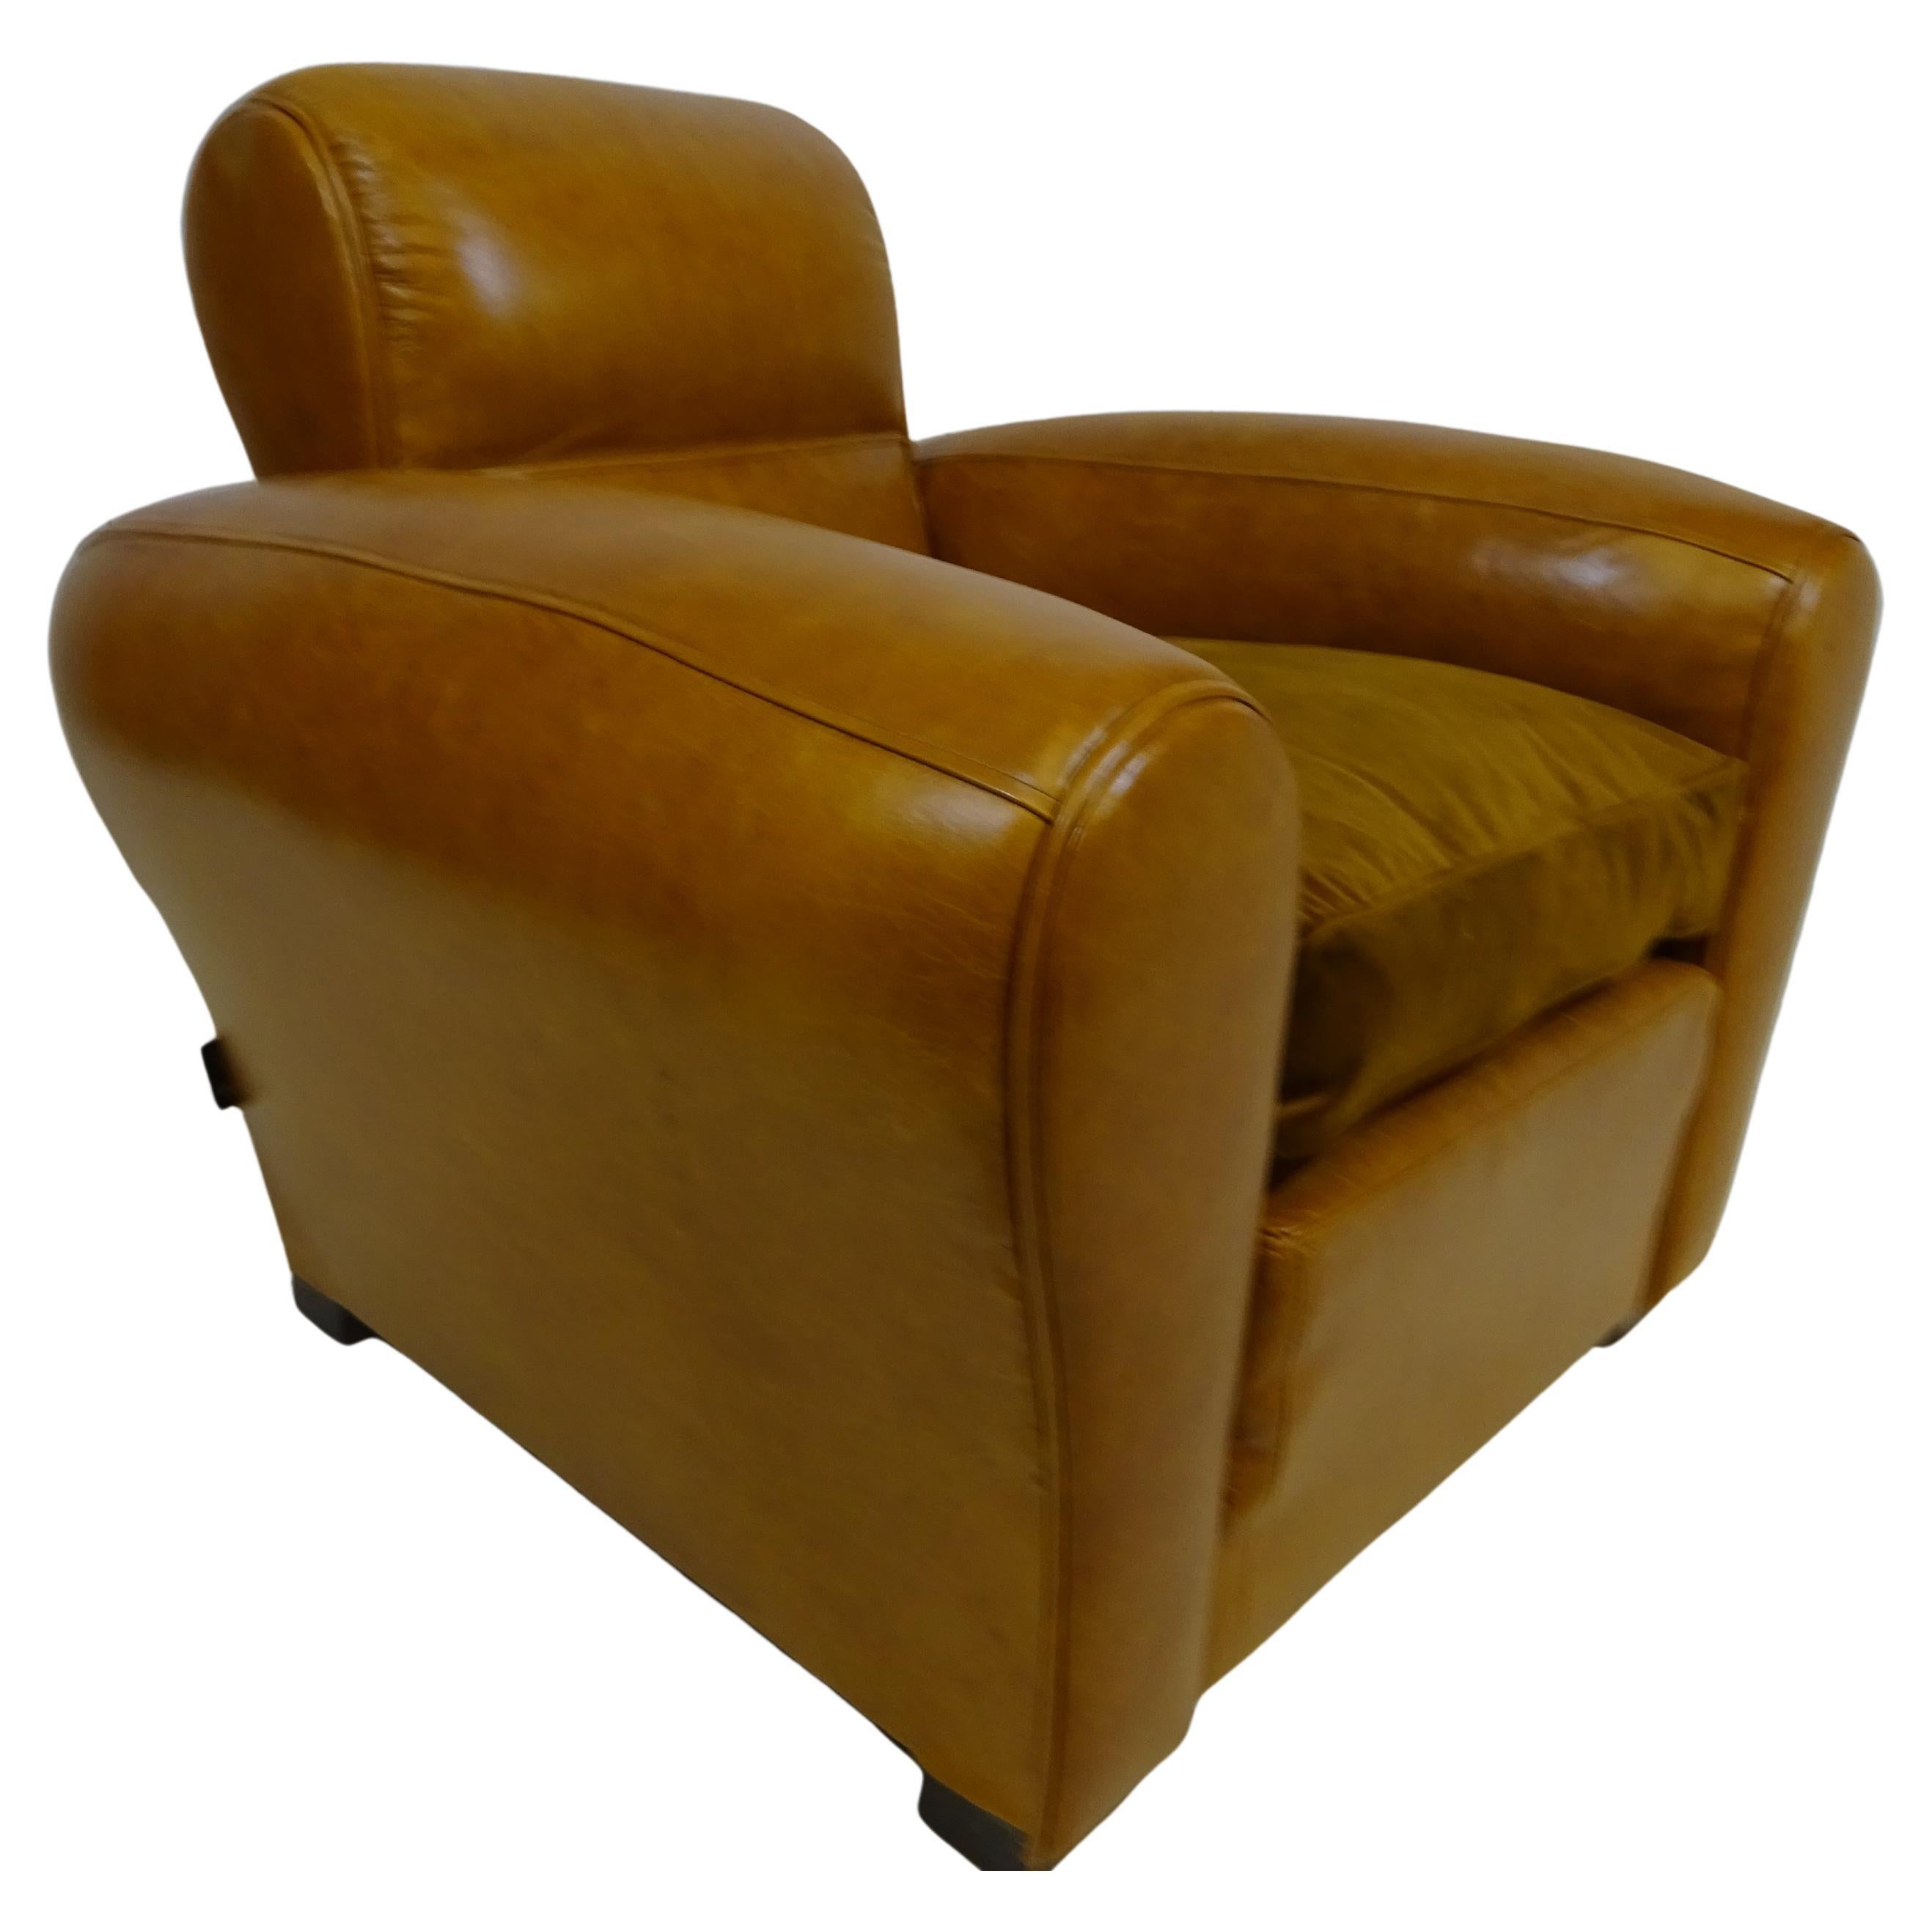 1920's Art Deco Club Chair in Distressed Caramel Aniline Leather